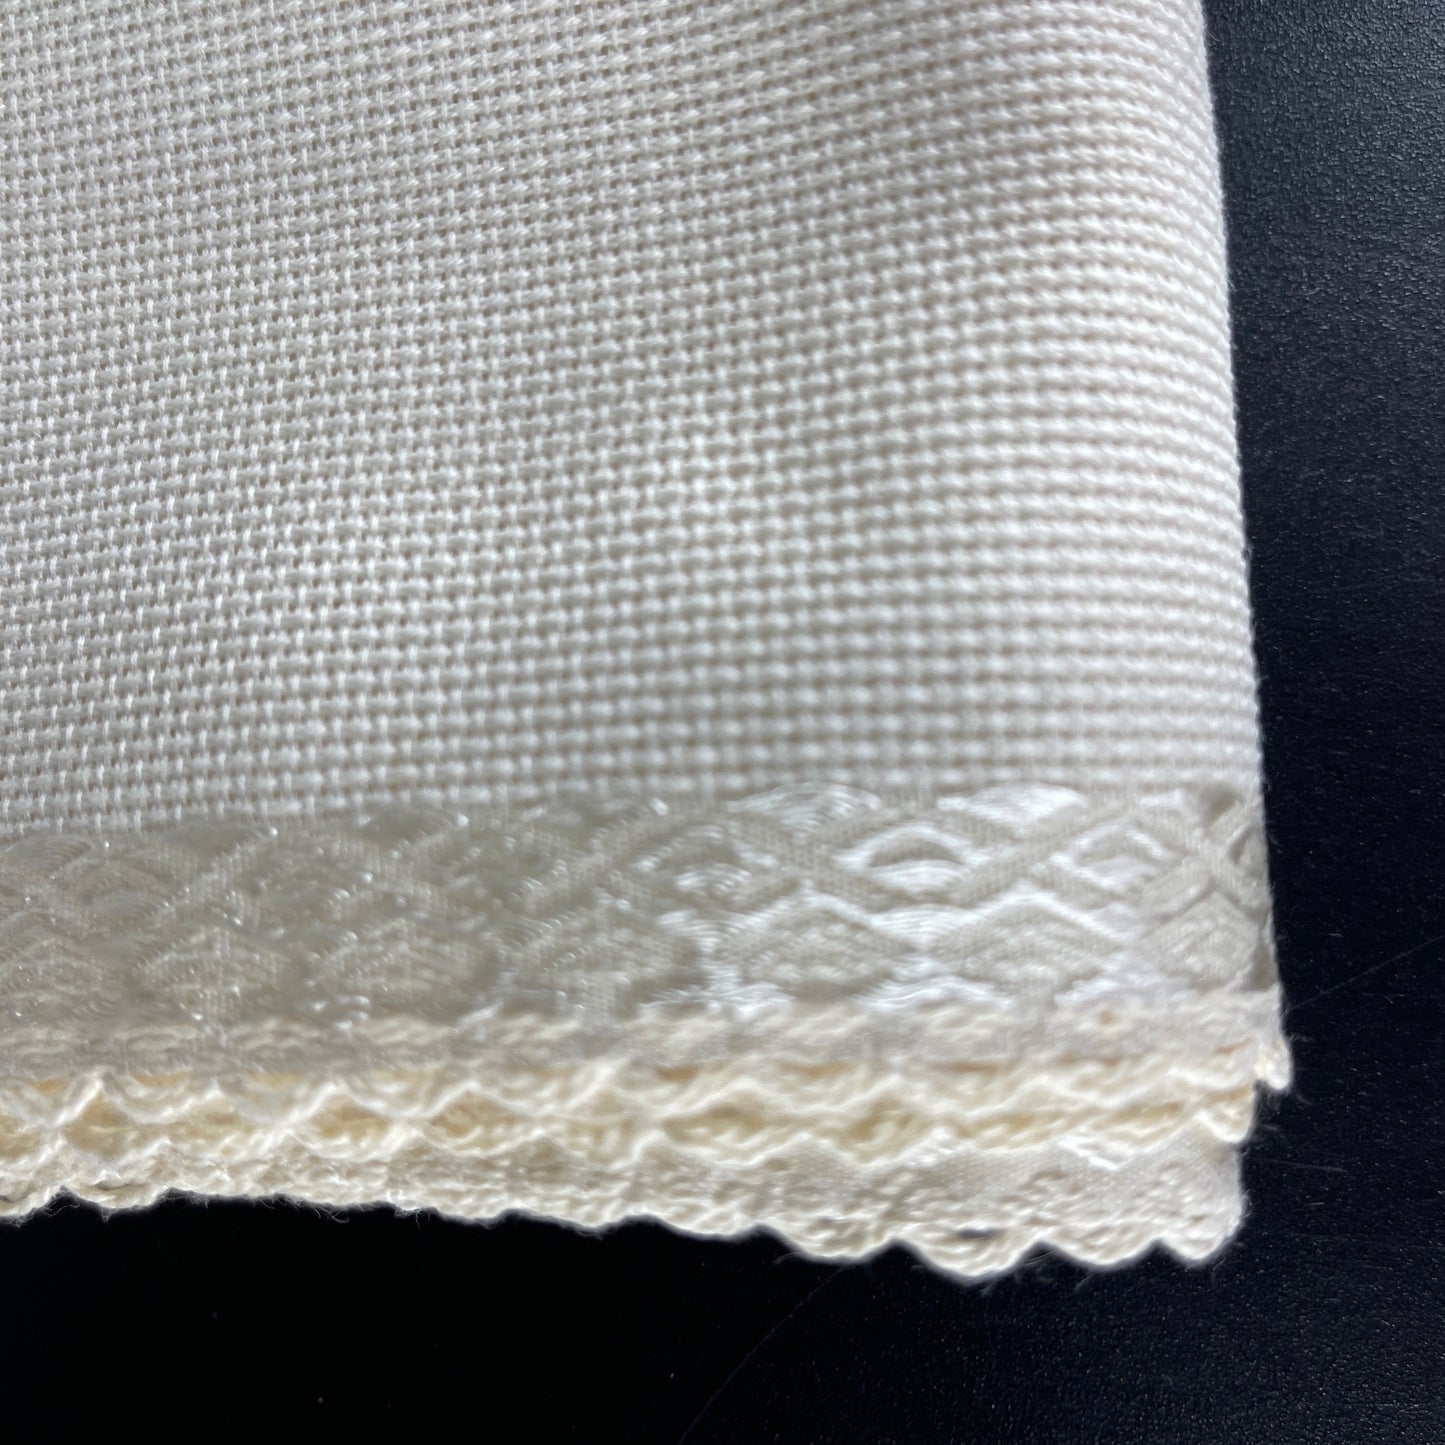 Beautiful banding with scalloped lace edging ivory 16 count needlecraft fabric*